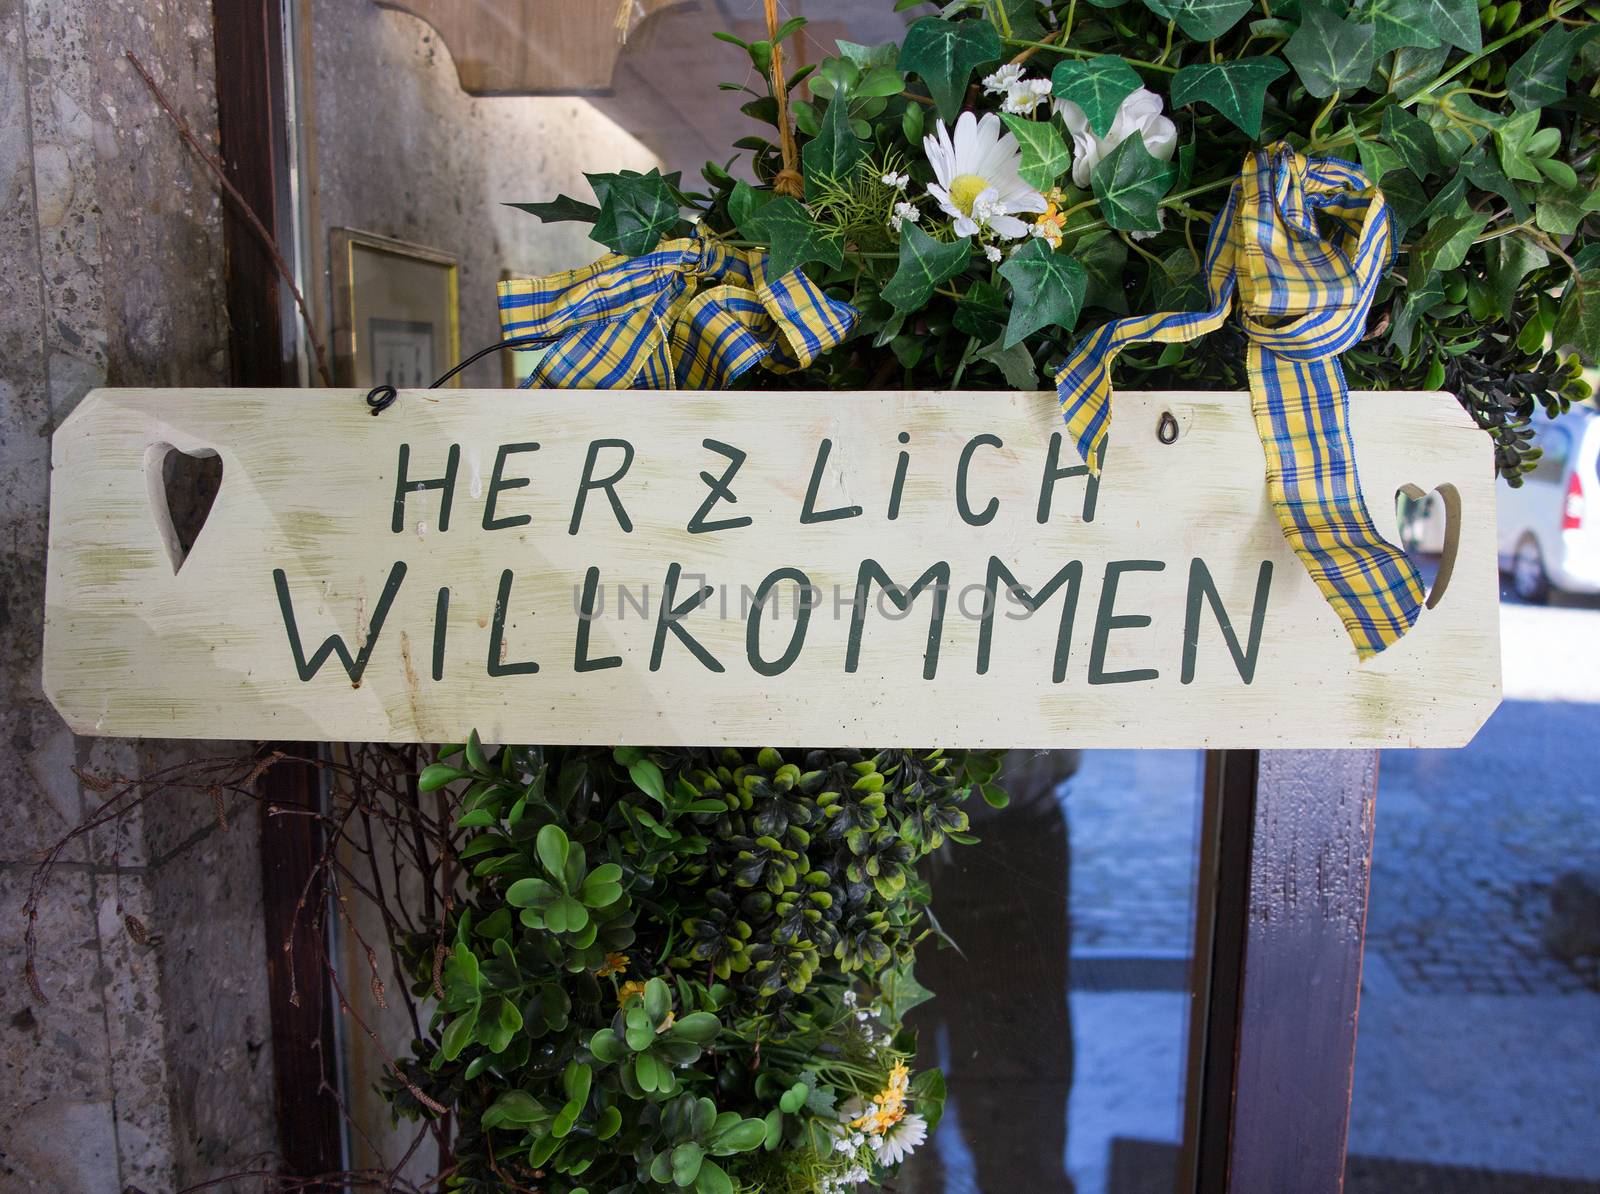 German "Herzlich willkommen" sign translates into "Hearty Welcome" in English by Kasparart